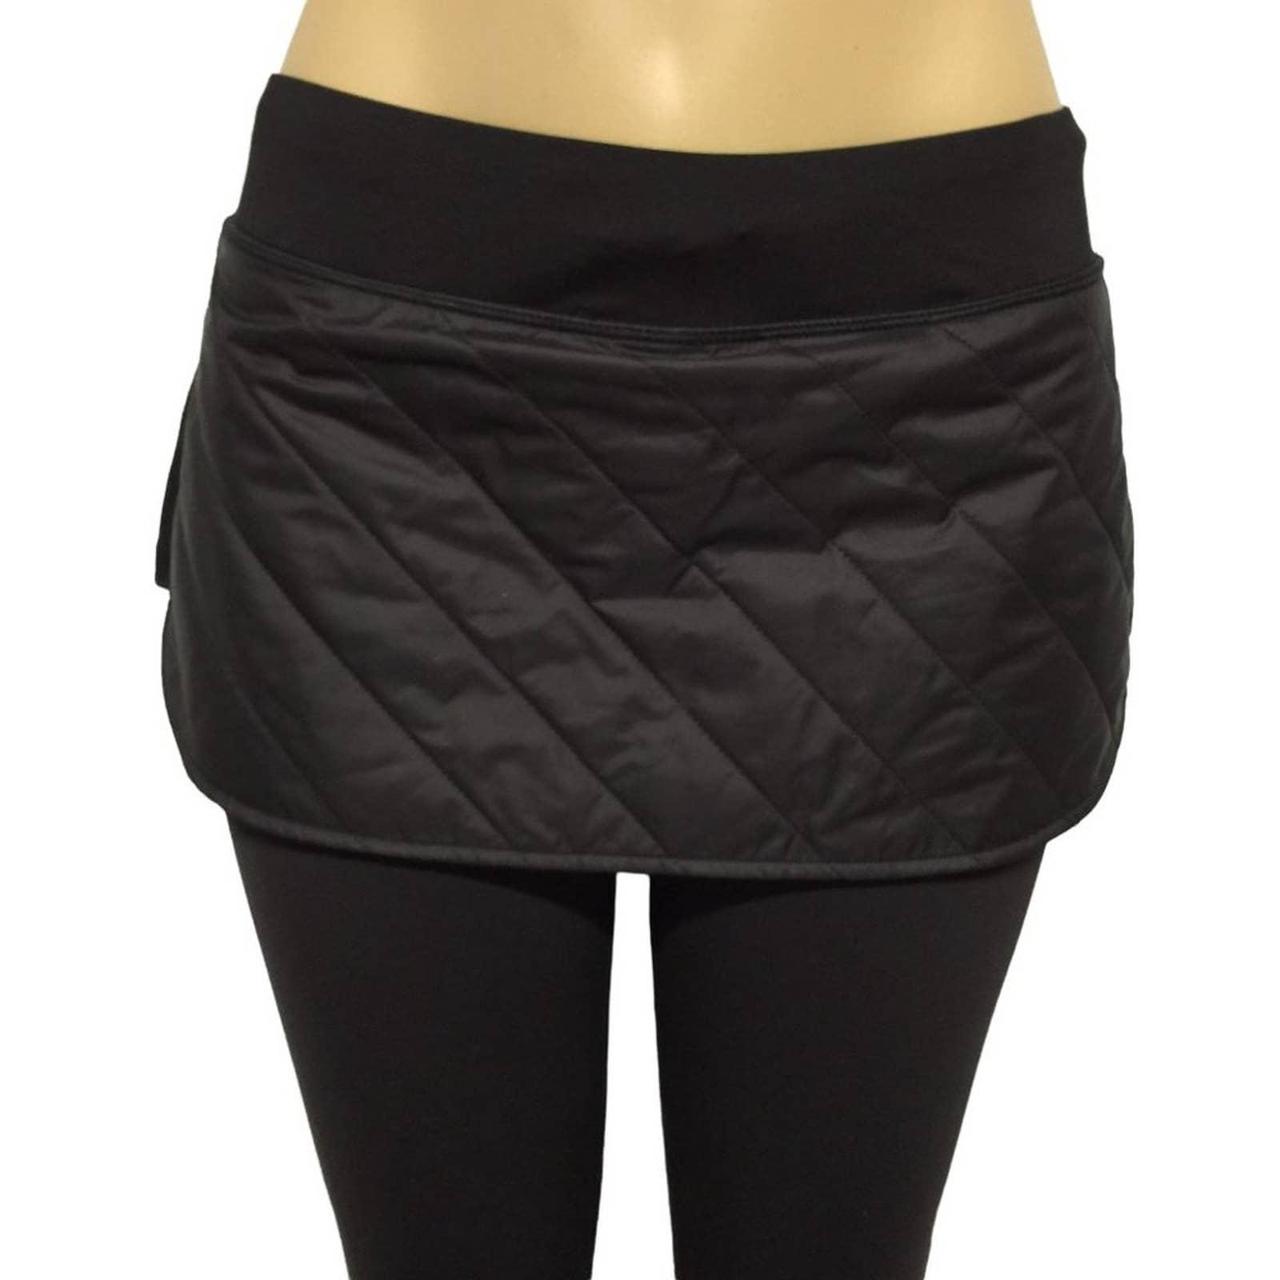 Product Image 2 - LUCY black leggings with skirt